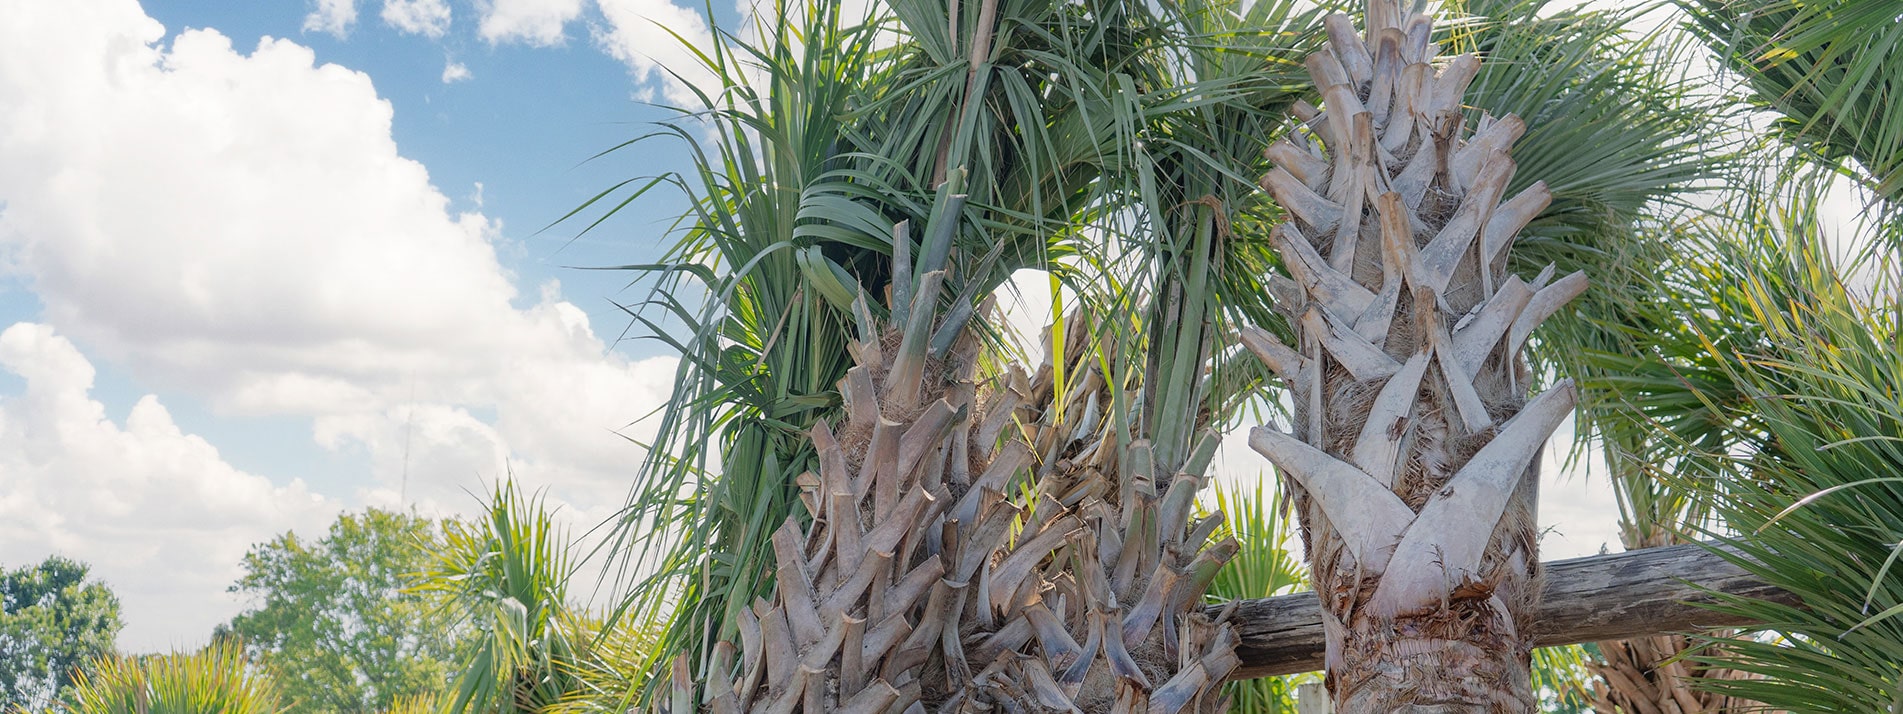 A palm tree with many leaves on it